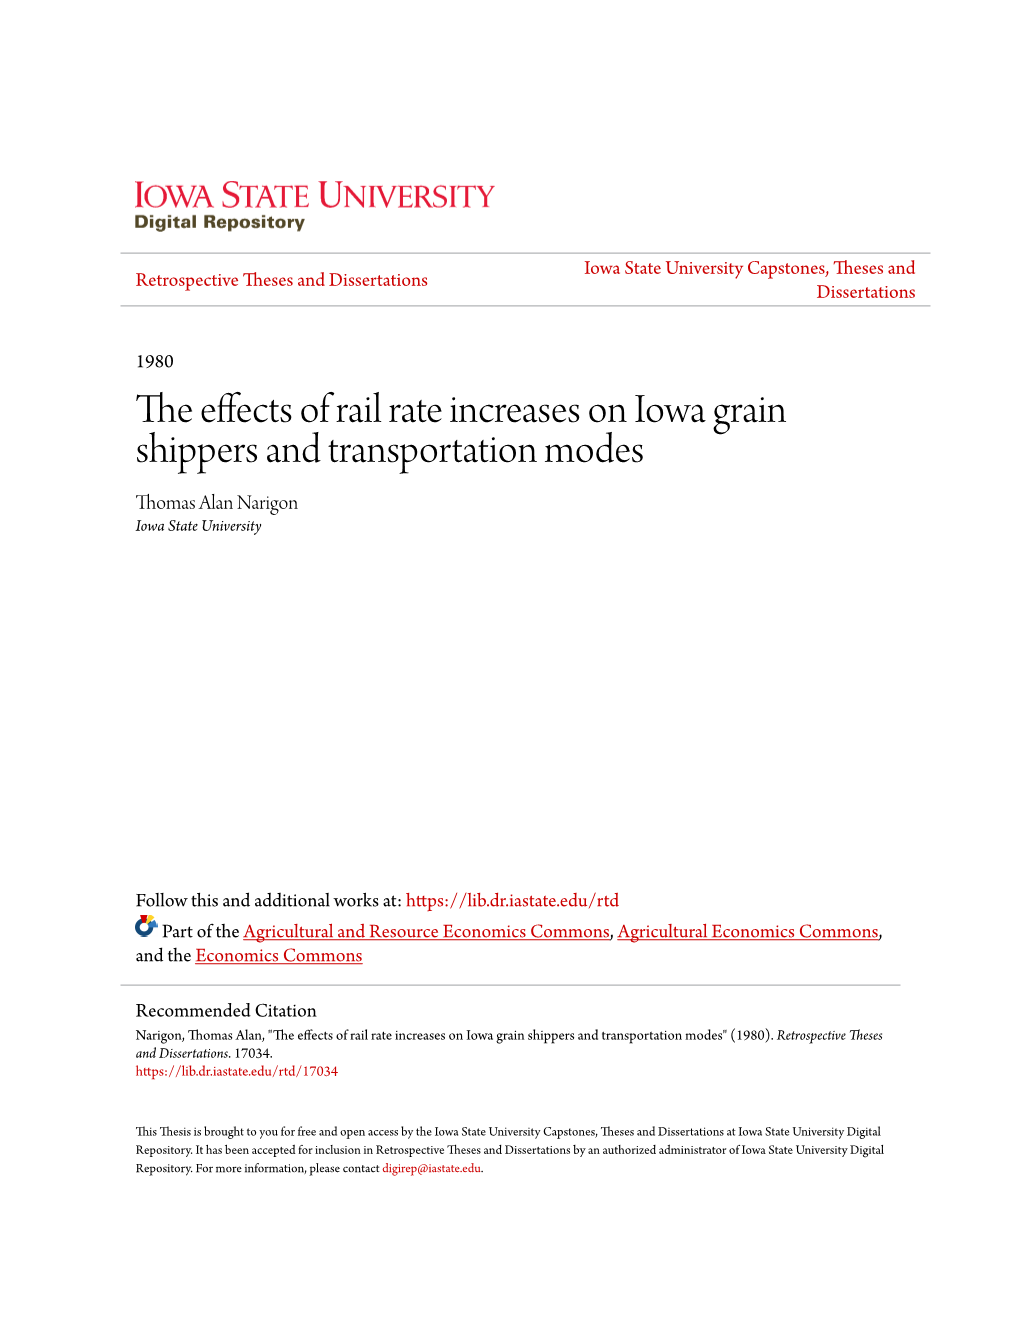 The Effects of Rail Rate Increases on Iowa Grain Shippers and Transportation Modes Thomas Alan Narigon Iowa State University